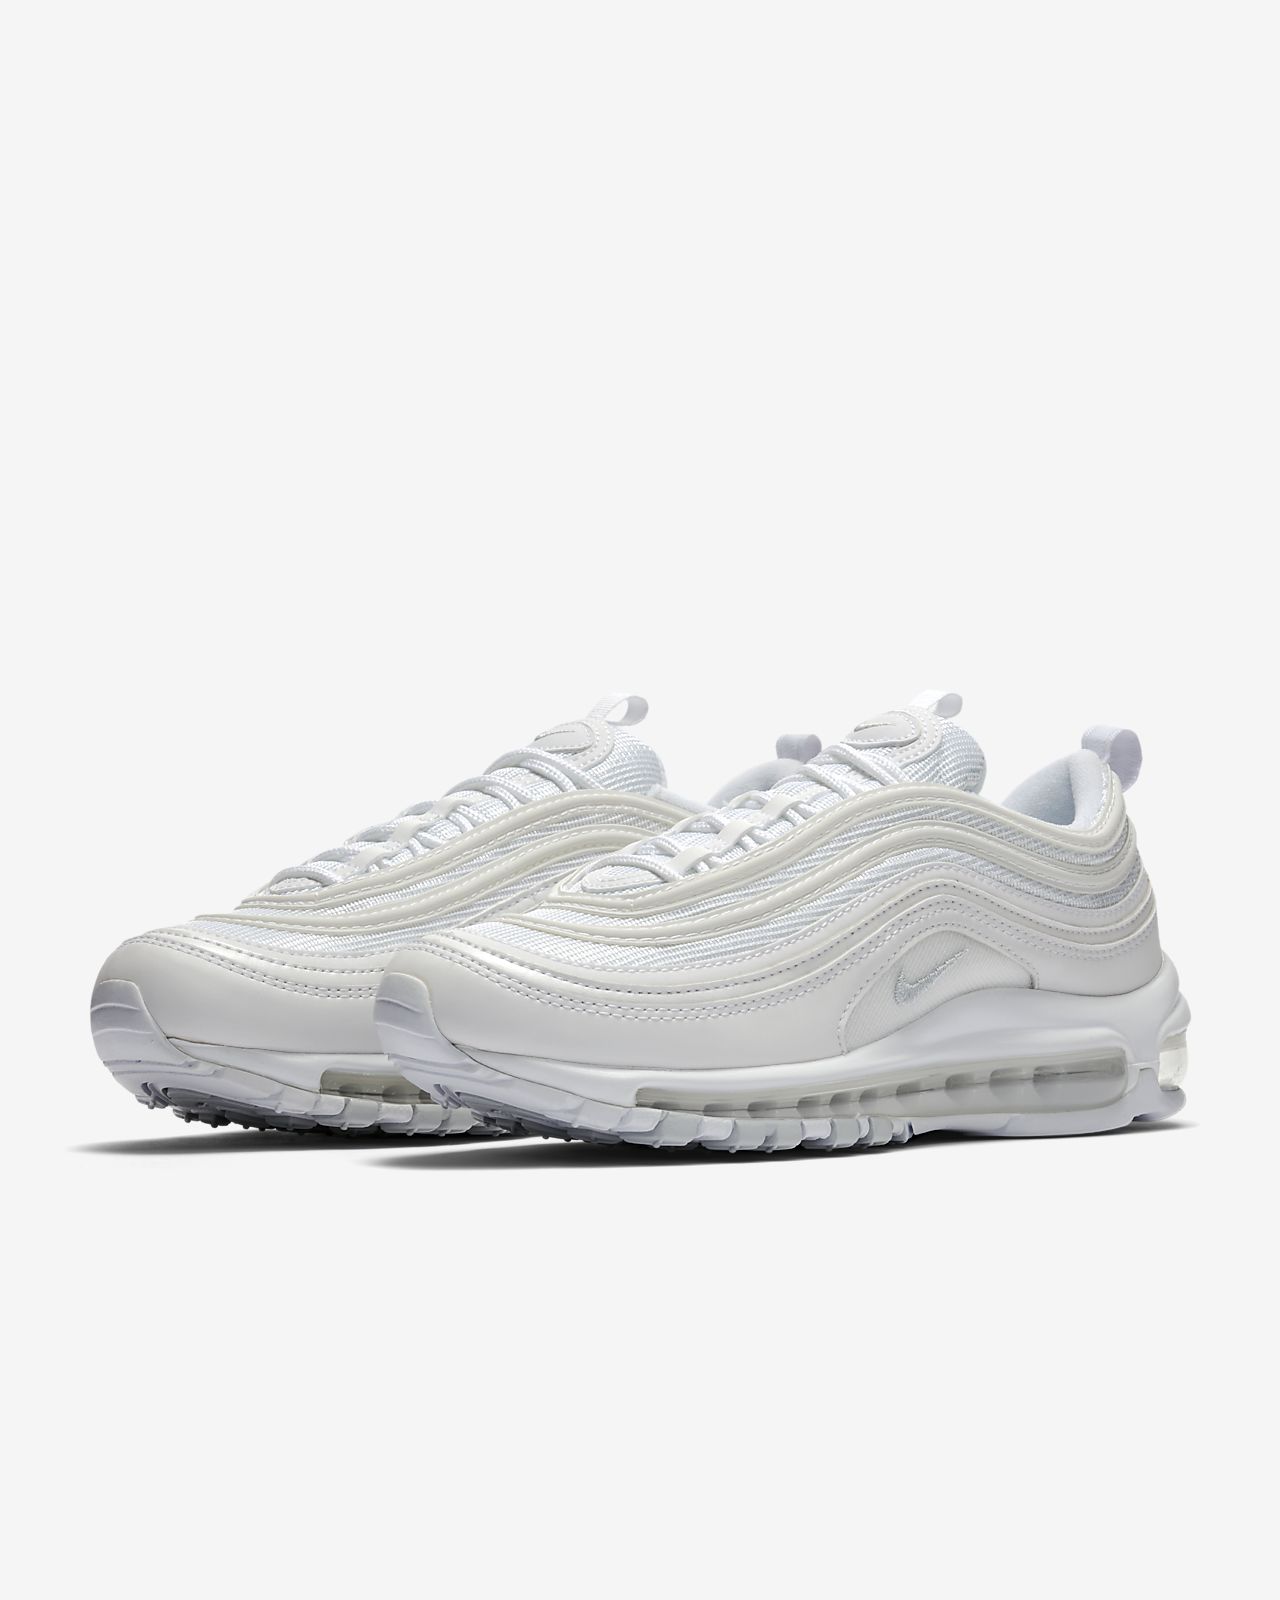 white nike air max 97s off 54% - www 